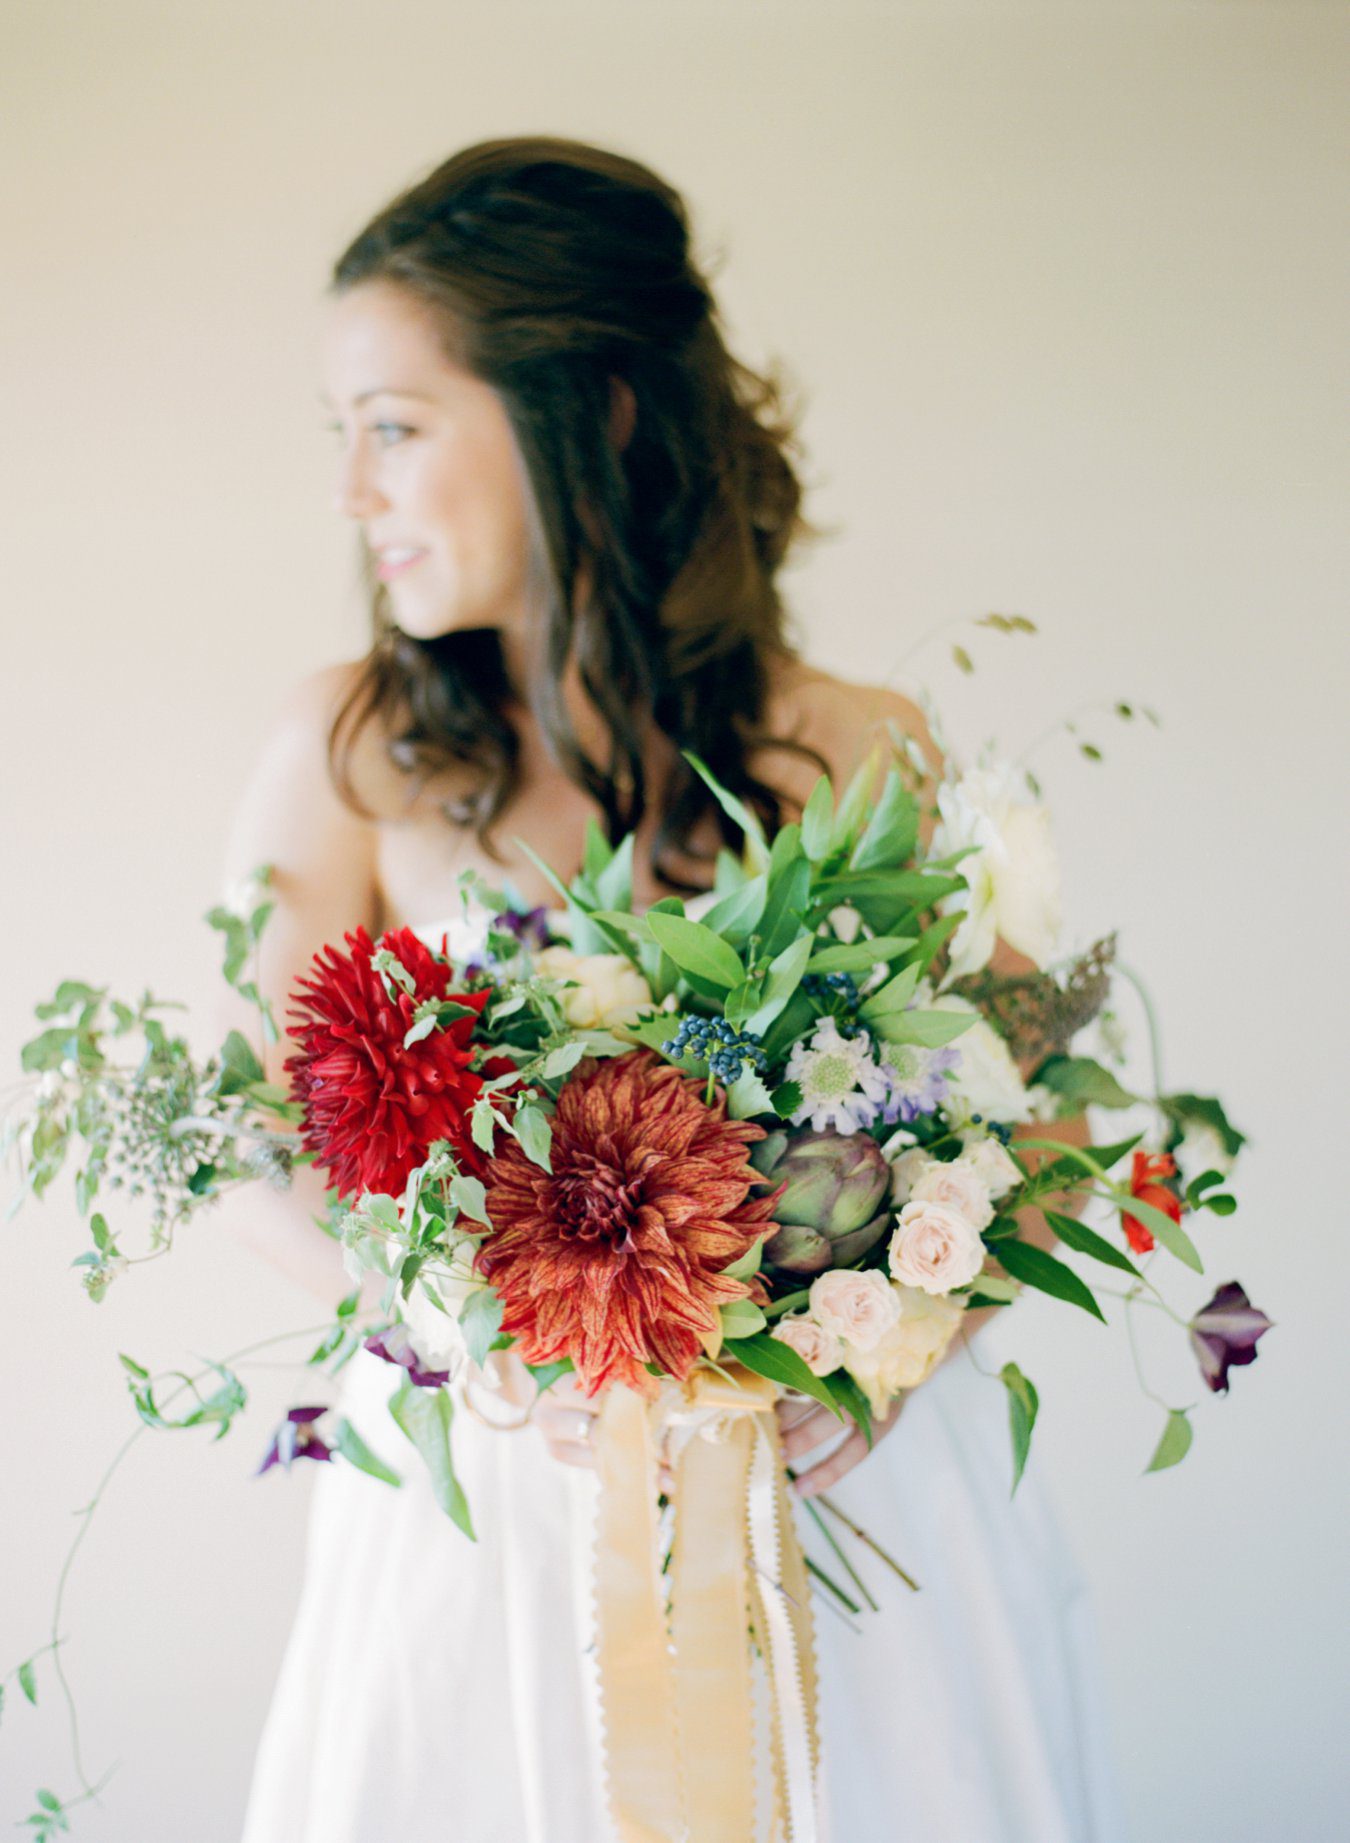 The Day's Design Floral | Bright & Bold bouquet | Cory Weber Photography